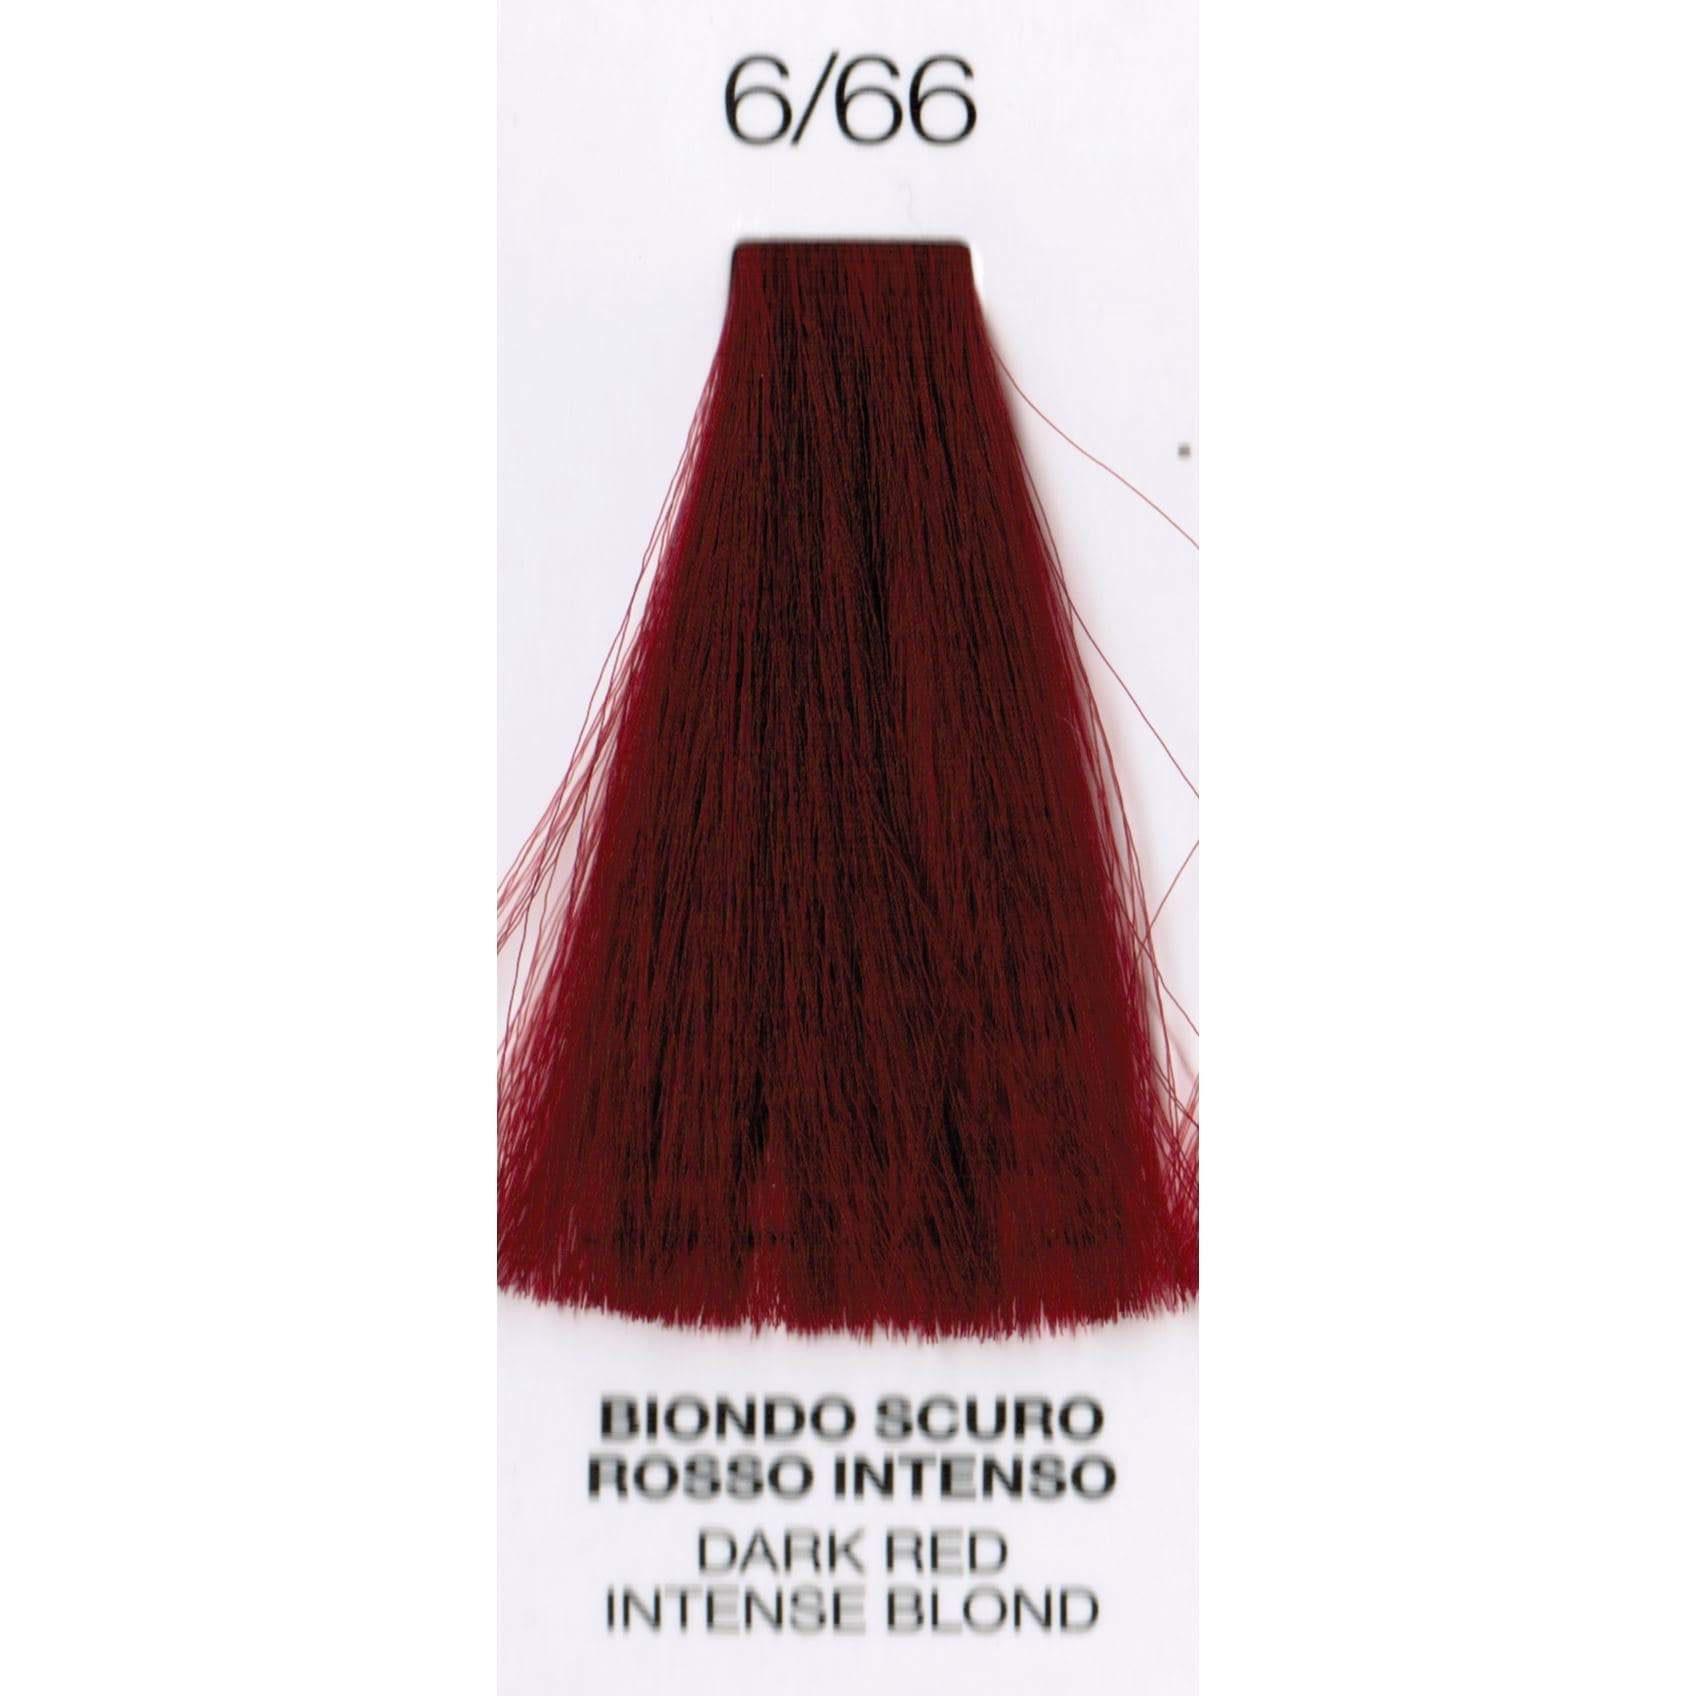 6/66 Dark Red Blonde Intense | Purity | Ammonia-Free Permanent Hair Color HAIR COLOR OYSTER 